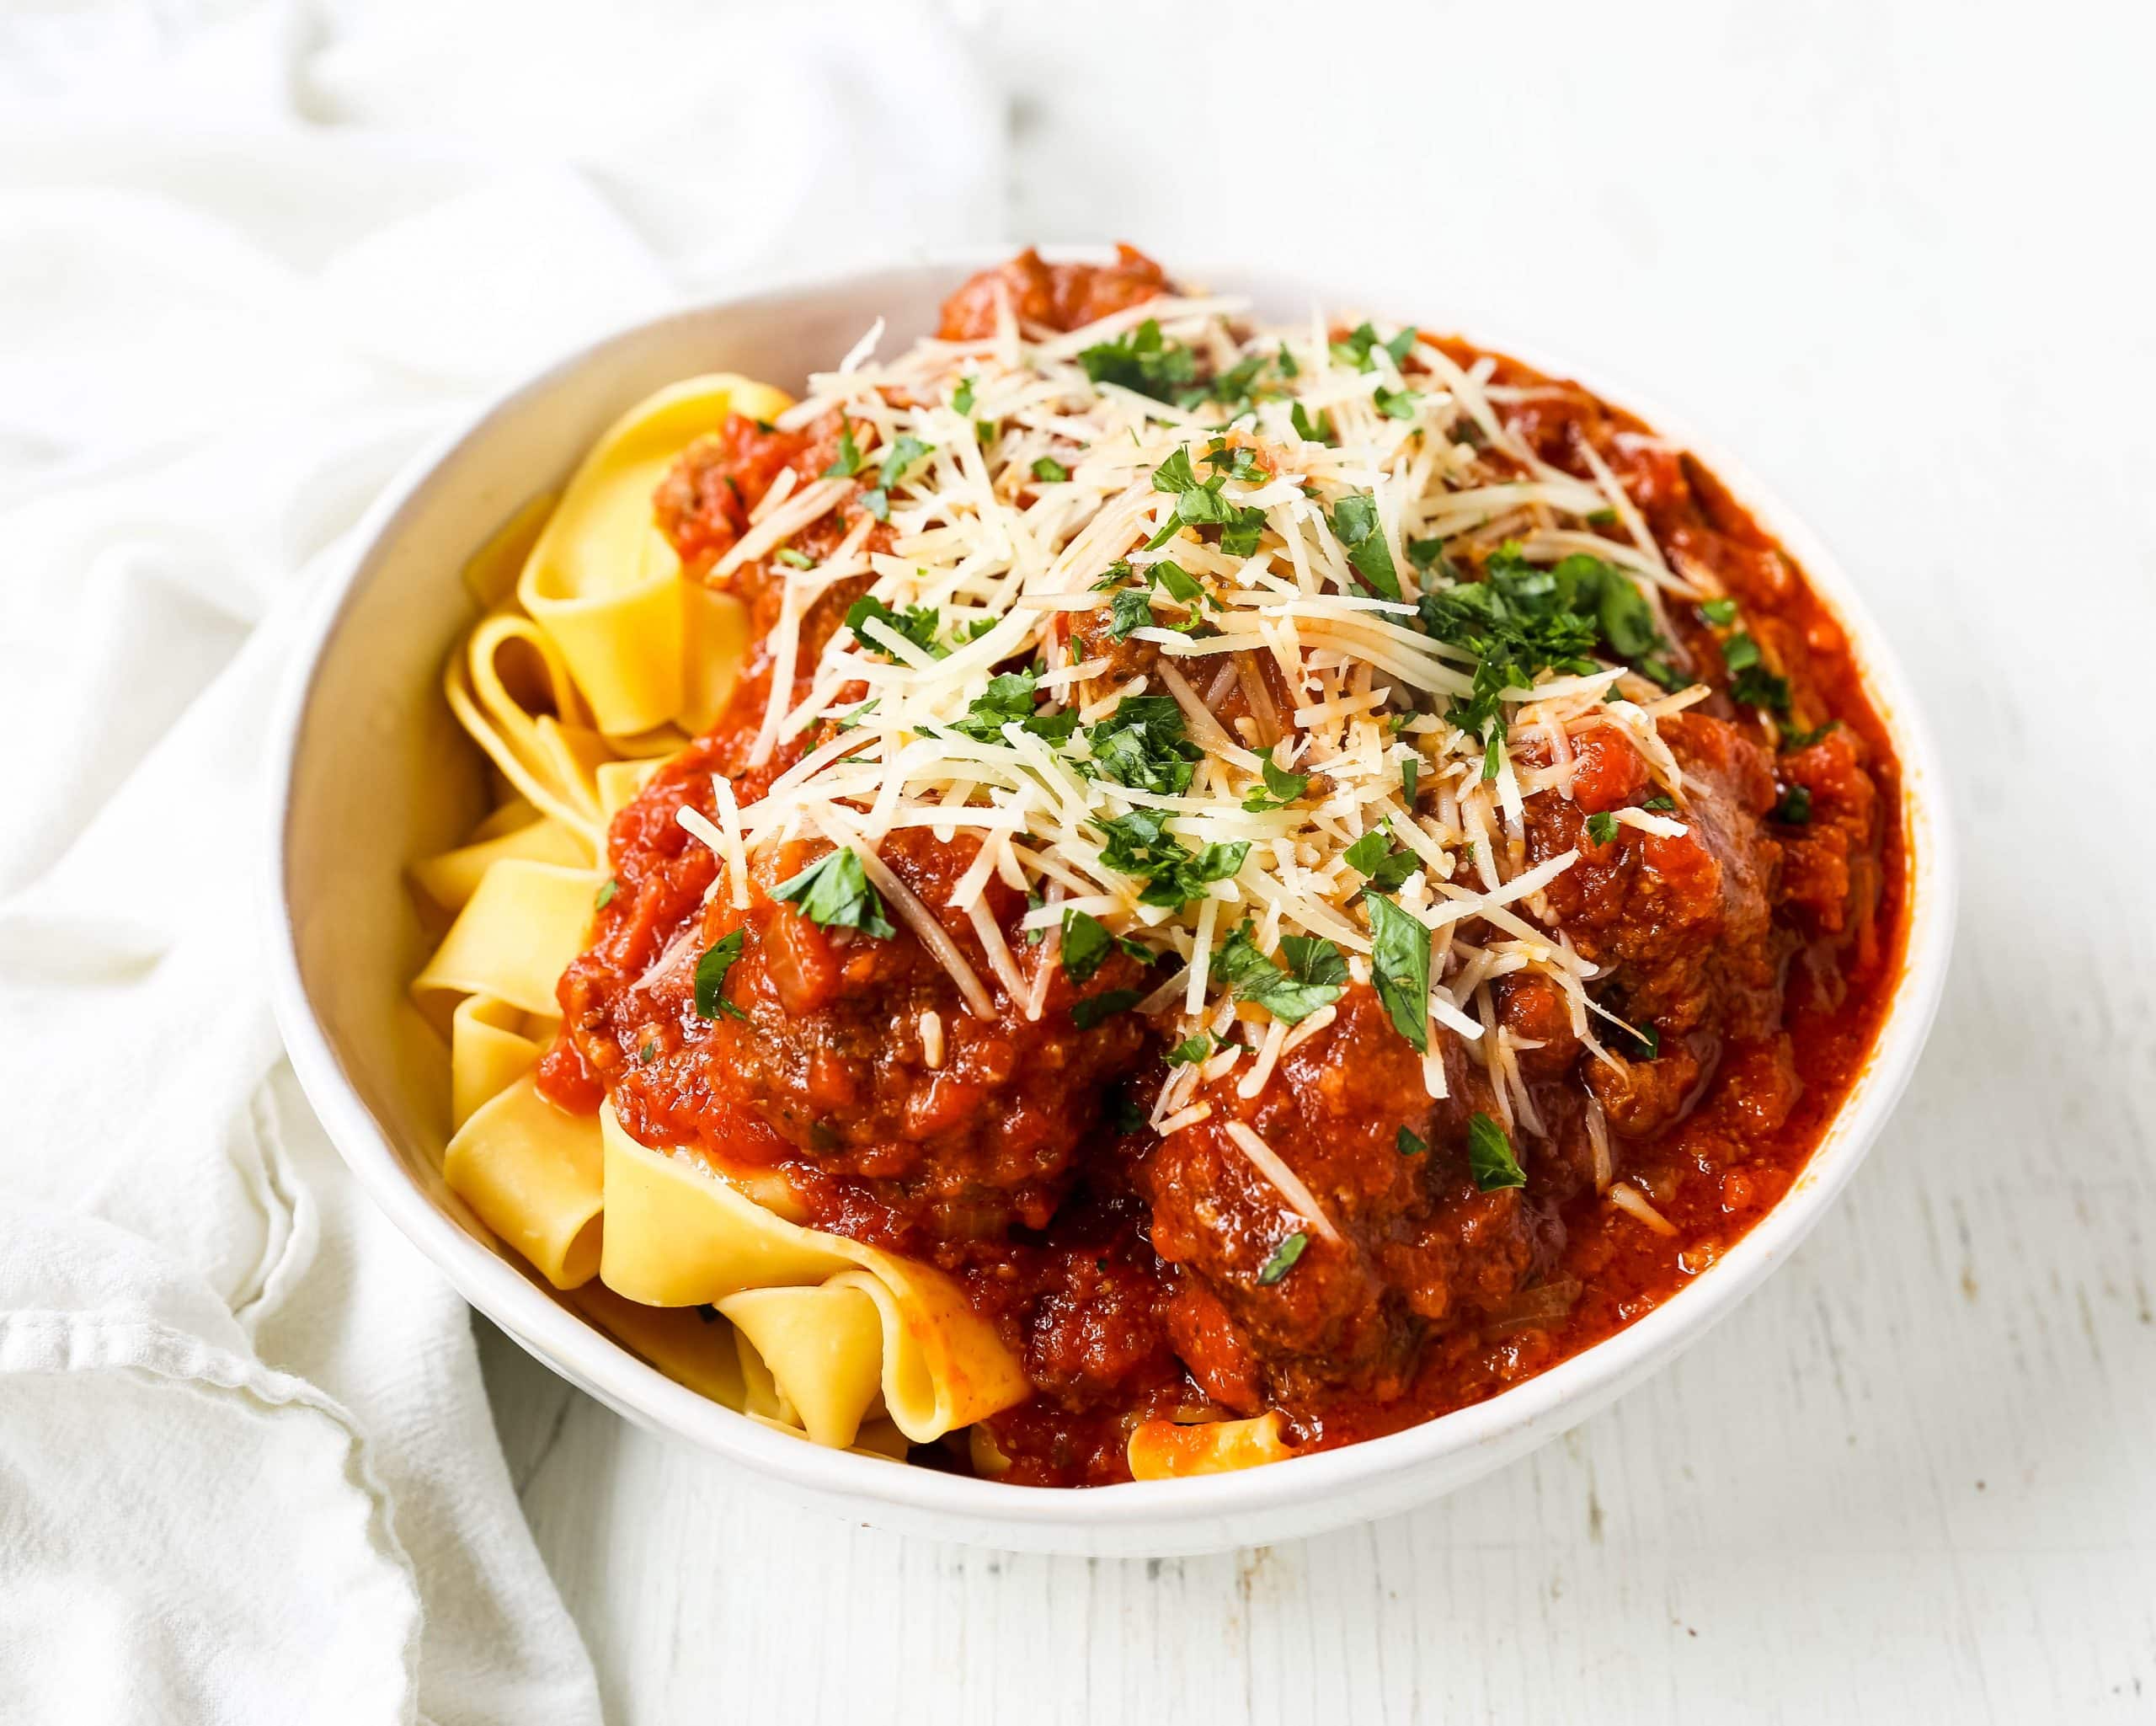 Slow Cooker Meatballs. Tender, moist homemade meatballs made with ground beef, sausage, parmesan cheese, bread crumbs, and spices. Slow cooking the meatballs make the most melt-in-your-mouth meatball! www.modernhoney.com #meatball #meatballs #italian #italianfood #pasta 